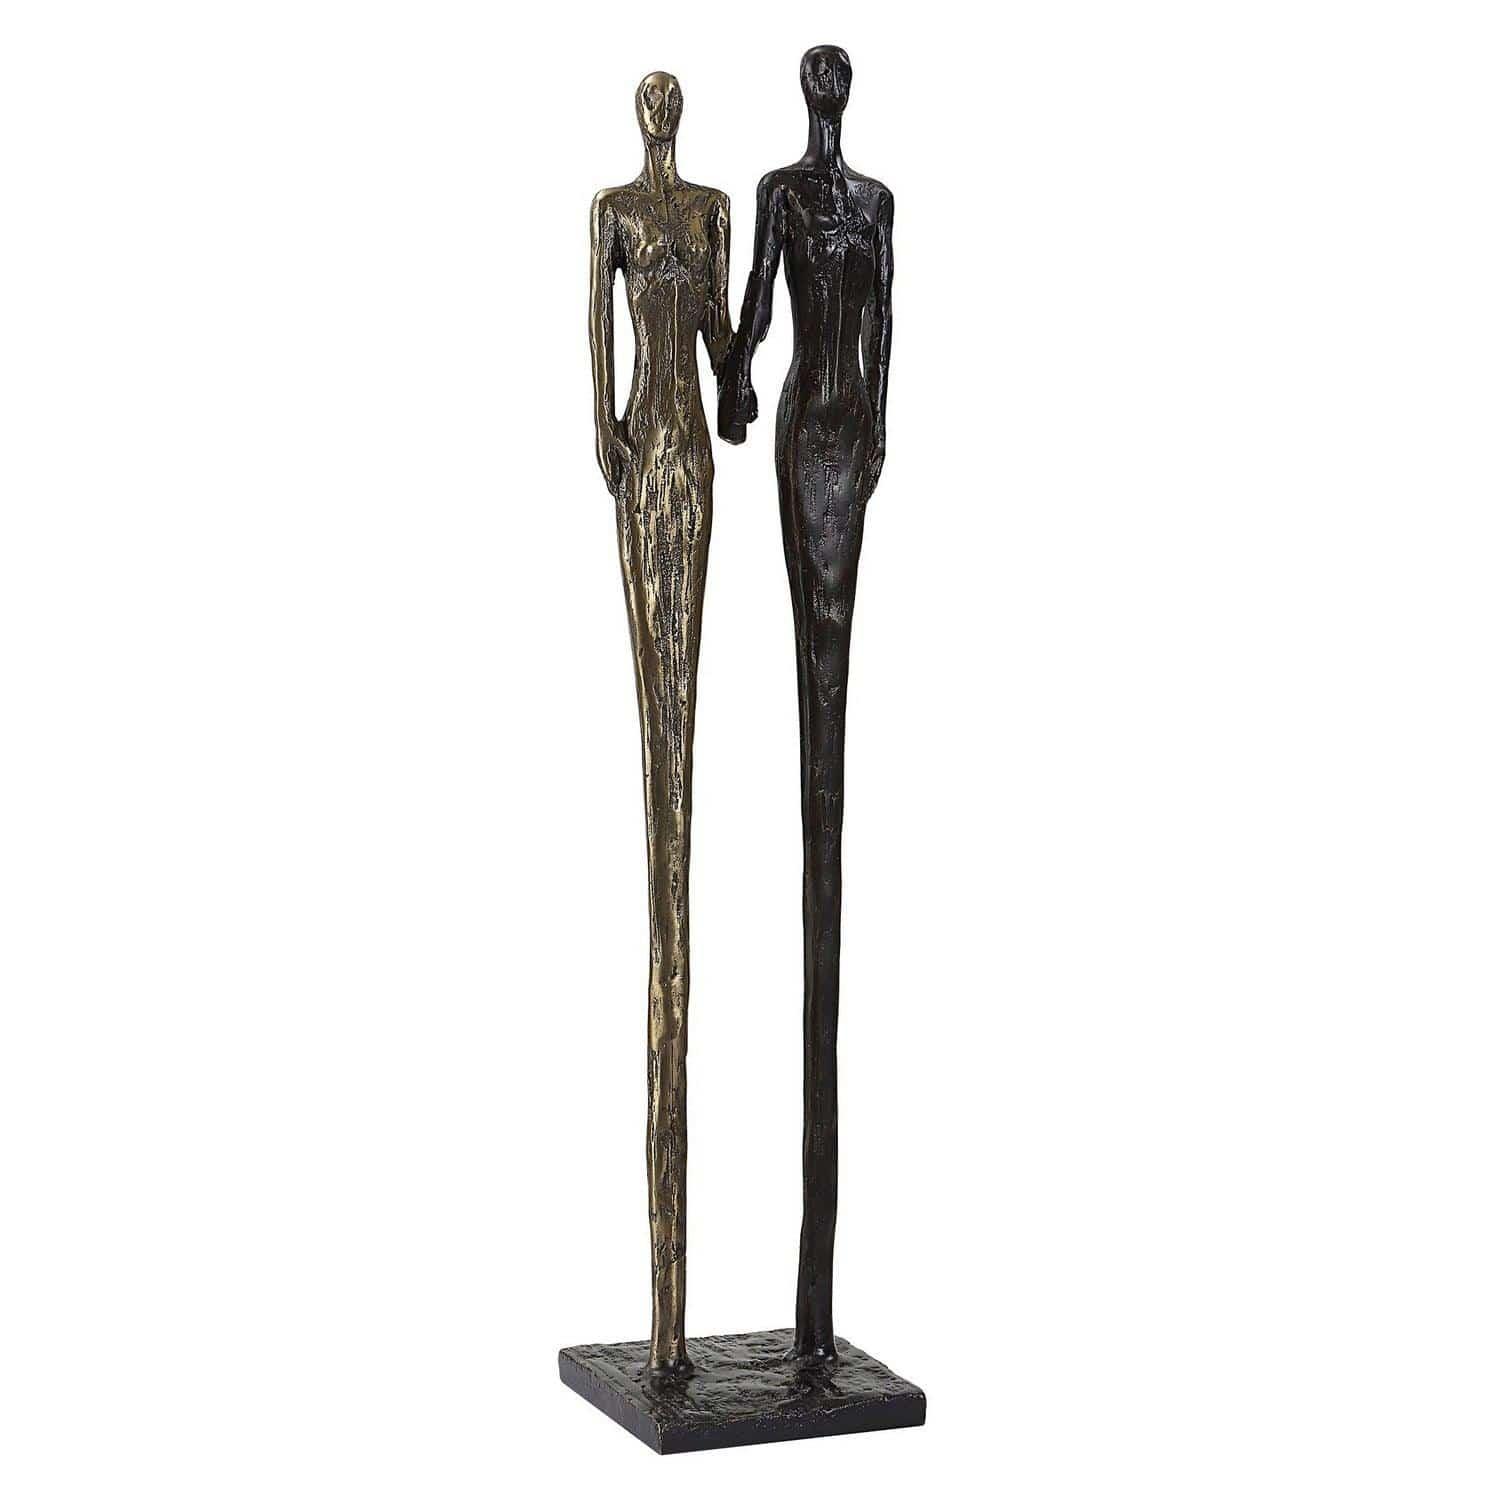 The Uttermost - Two's Sculpture - 18008 | Montreal Lighting & Hardware